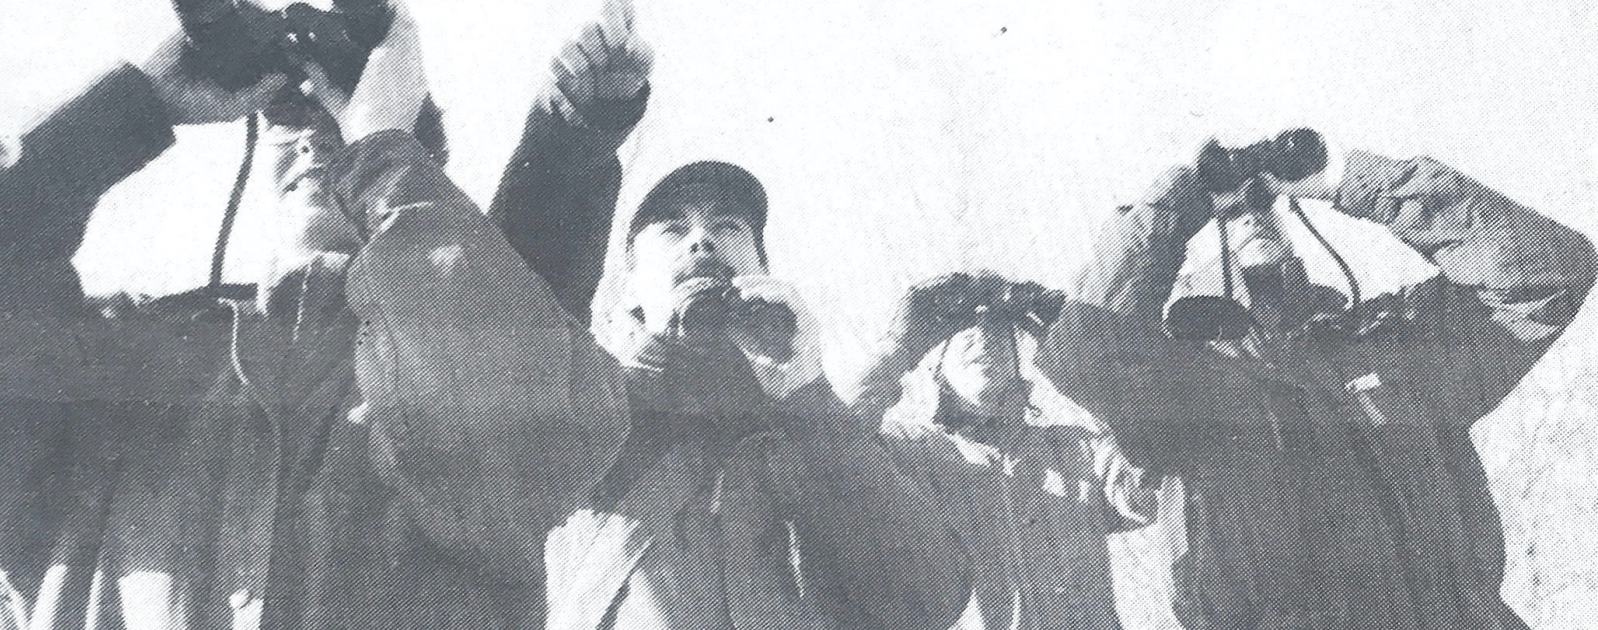 A man points in the distance while holding binoculars. The three individuals surrounding him look through binoculars in the direction he is pointing.